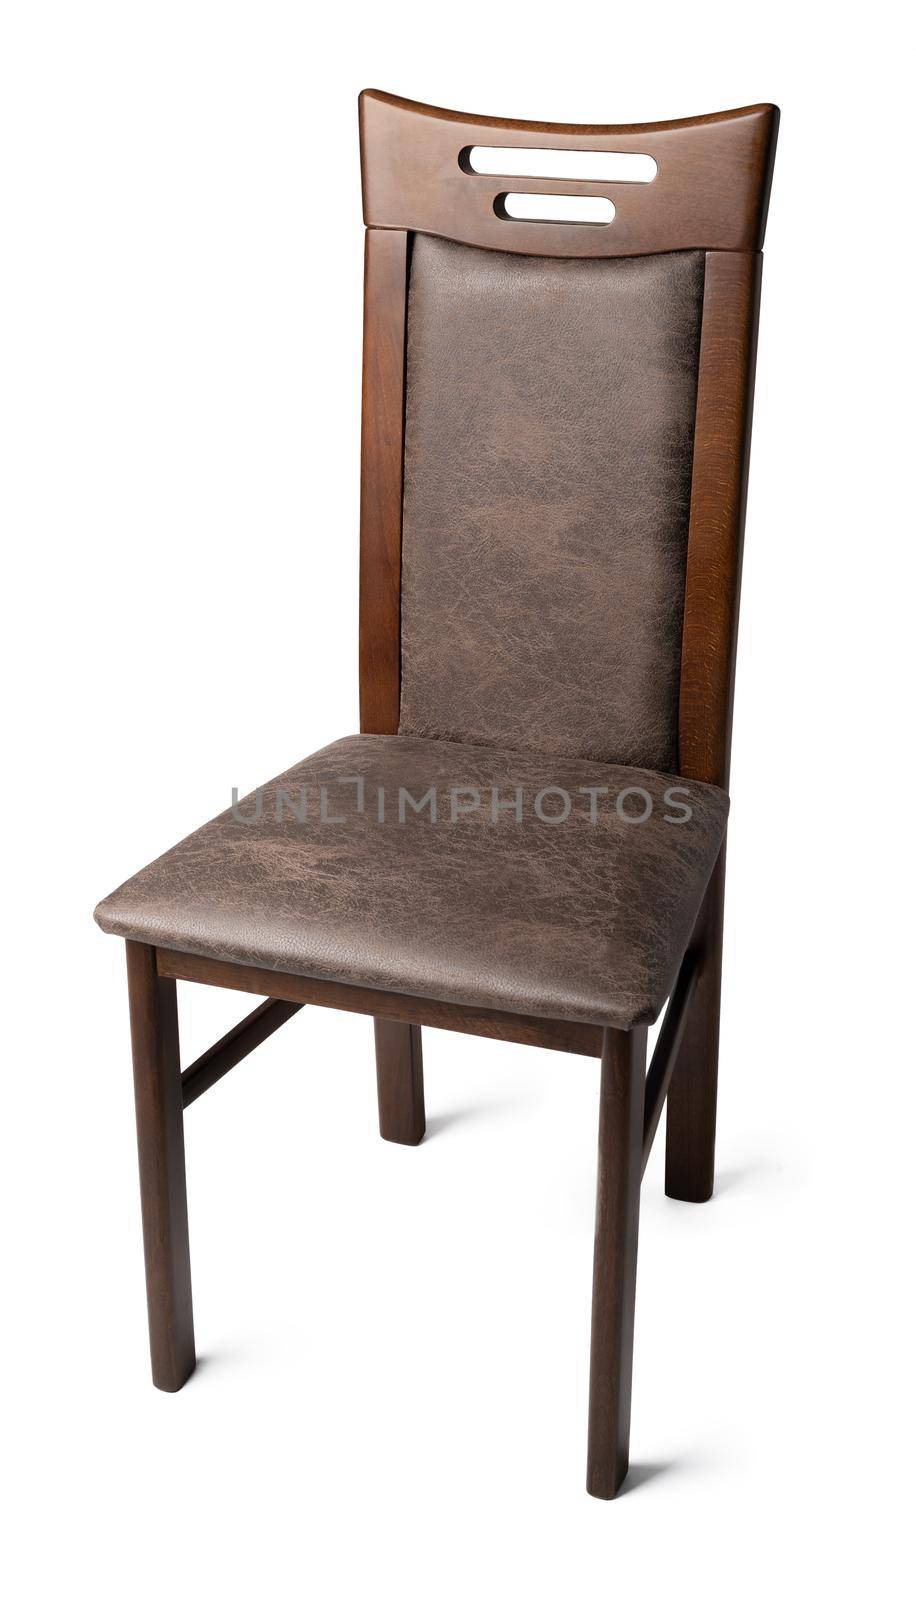 Comfortable chair isolated on white background. Studio shot